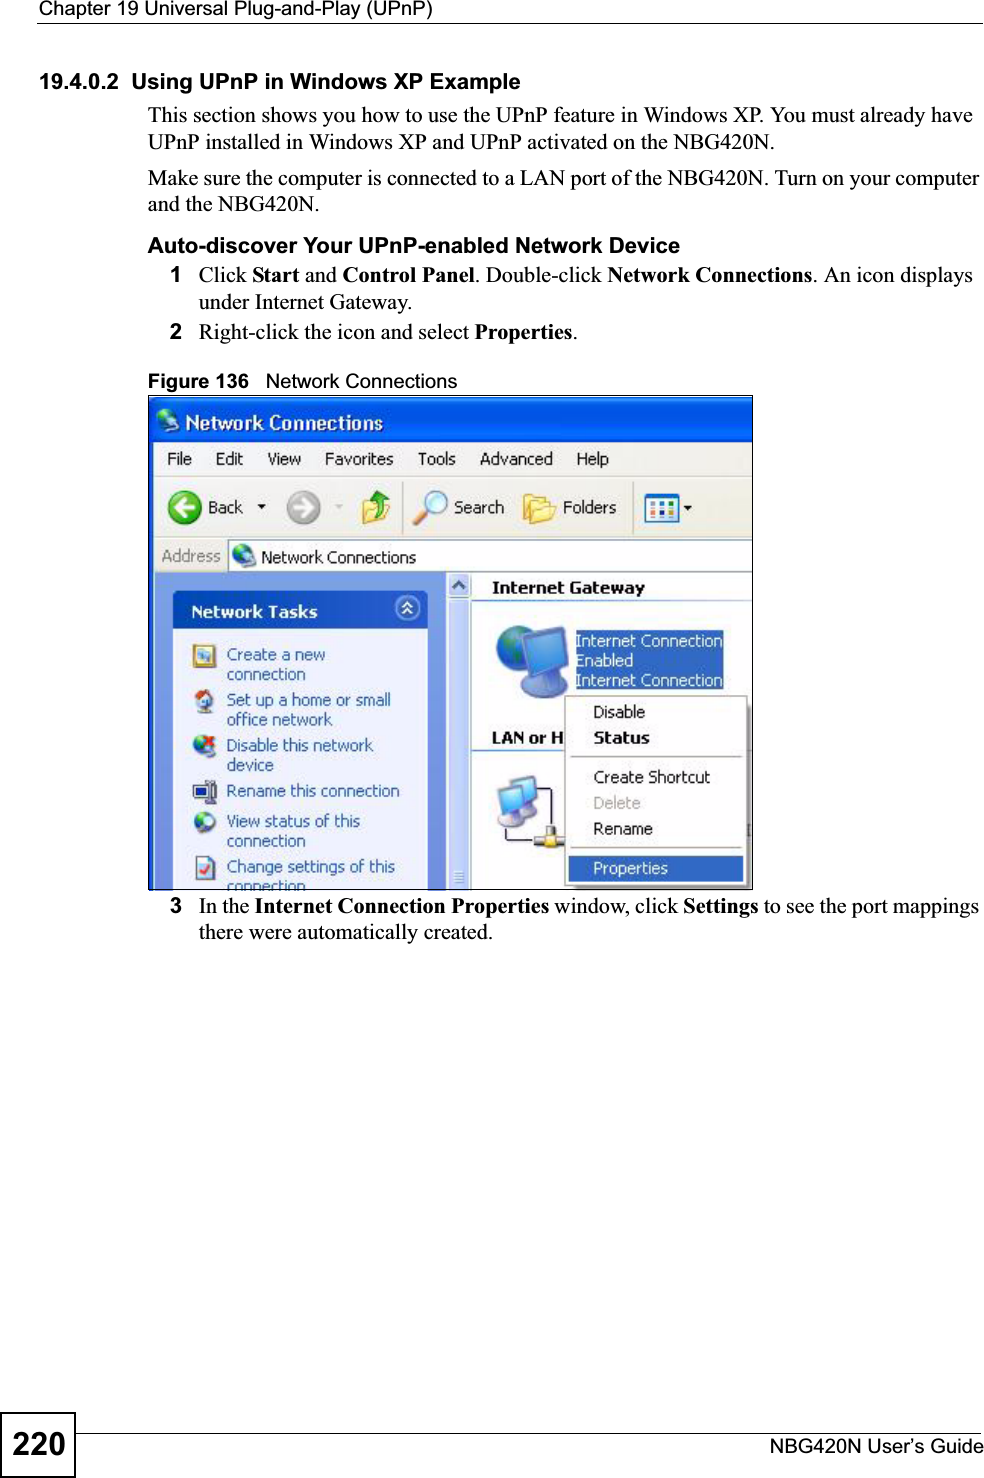 Chapter 19 Universal Plug-and-Play (UPnP)NBG420N User’s Guide22019.4.0.2  Using UPnP in Windows XP ExampleThis section shows you how to use the UPnP feature in Windows XP. You must already have UPnP installed in Windows XP and UPnP activated on the NBG420N.Make sure the computer is connected to a LAN port of the NBG420N. Turn on your computer and the NBG420N. Auto-discover Your UPnP-enabled Network Device1Click Start and Control Panel. Double-click Network Connections. An icon displays under Internet Gateway.2Right-click the icon and select Properties.Figure 136   Network Connections3In the Internet Connection Properties window, click Settings to see the port mappings there were automatically created. 